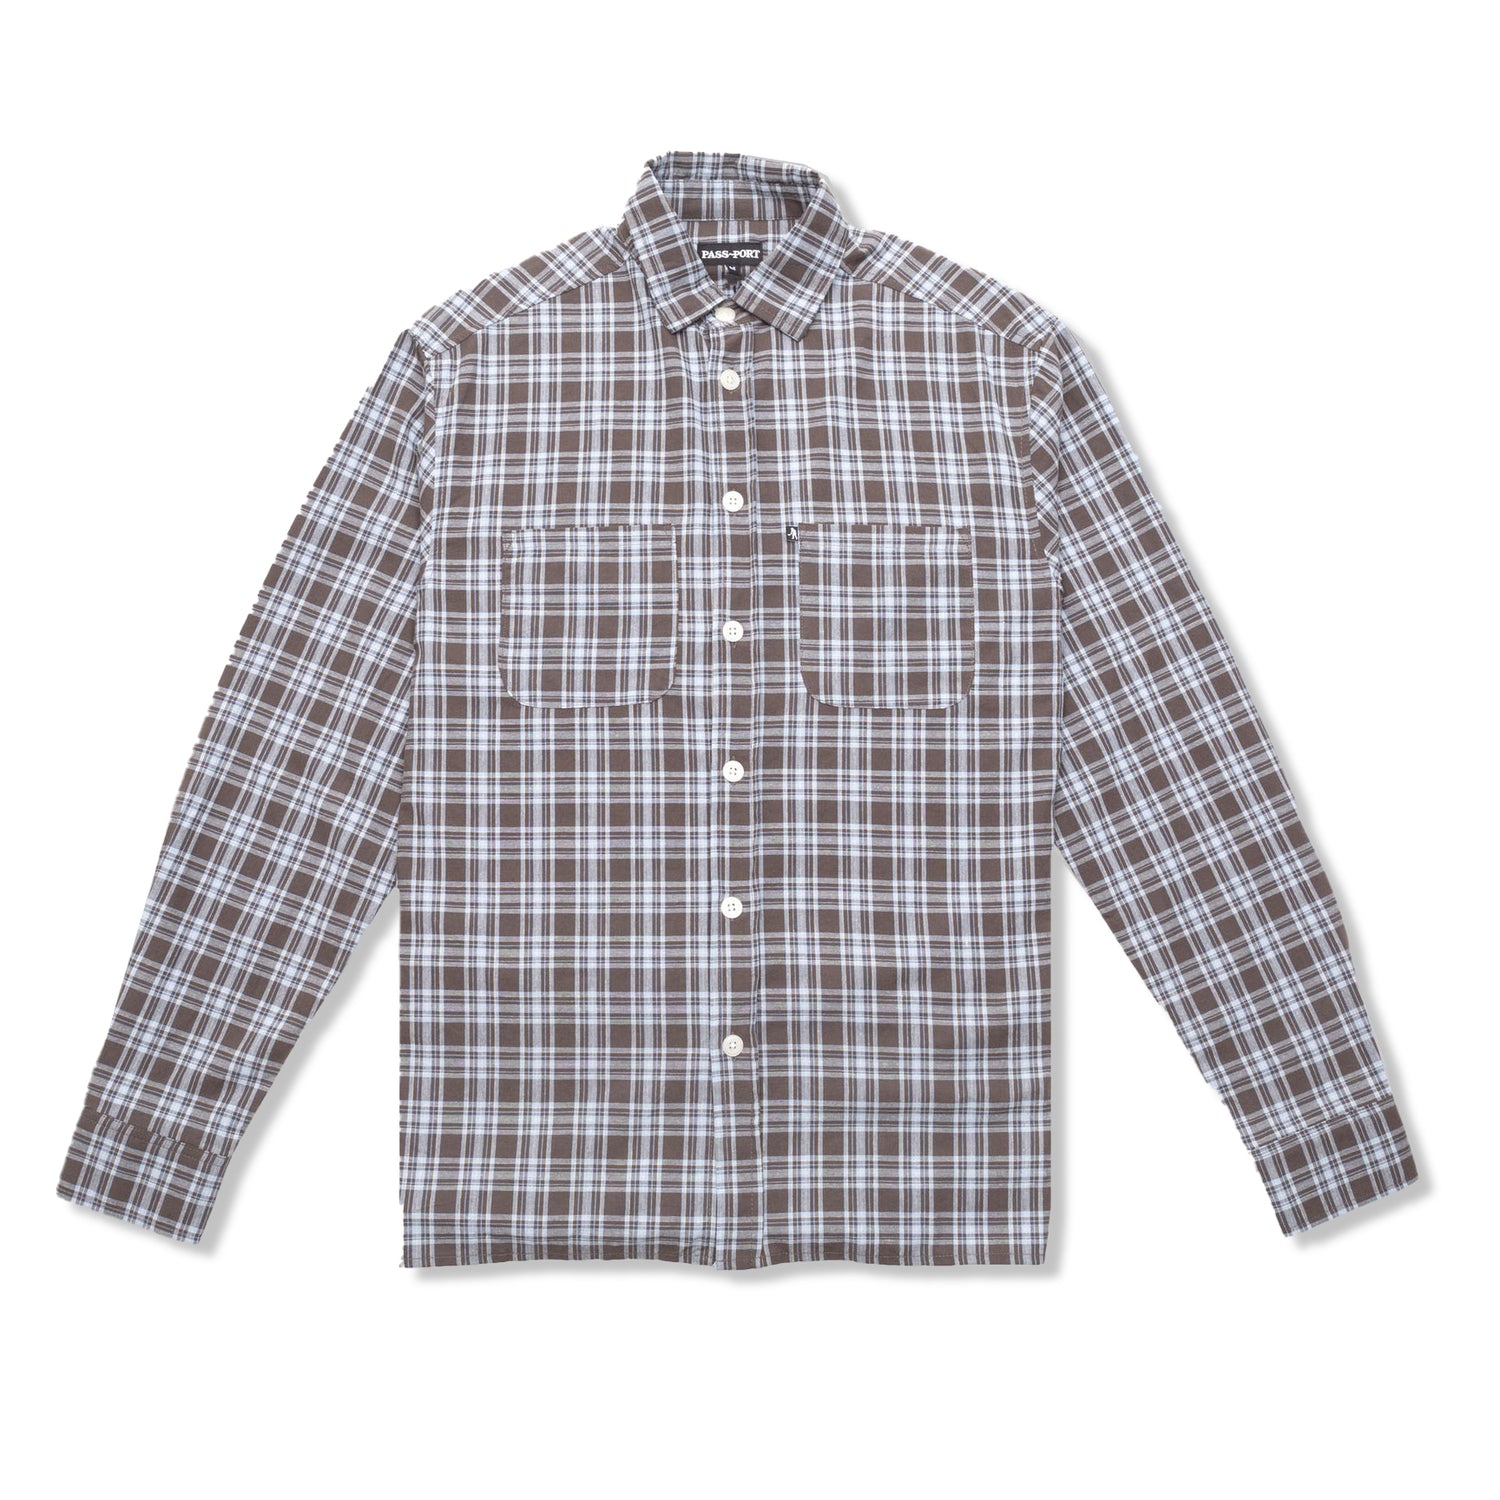 Workers Check L/S Shirt, Choc / Blue